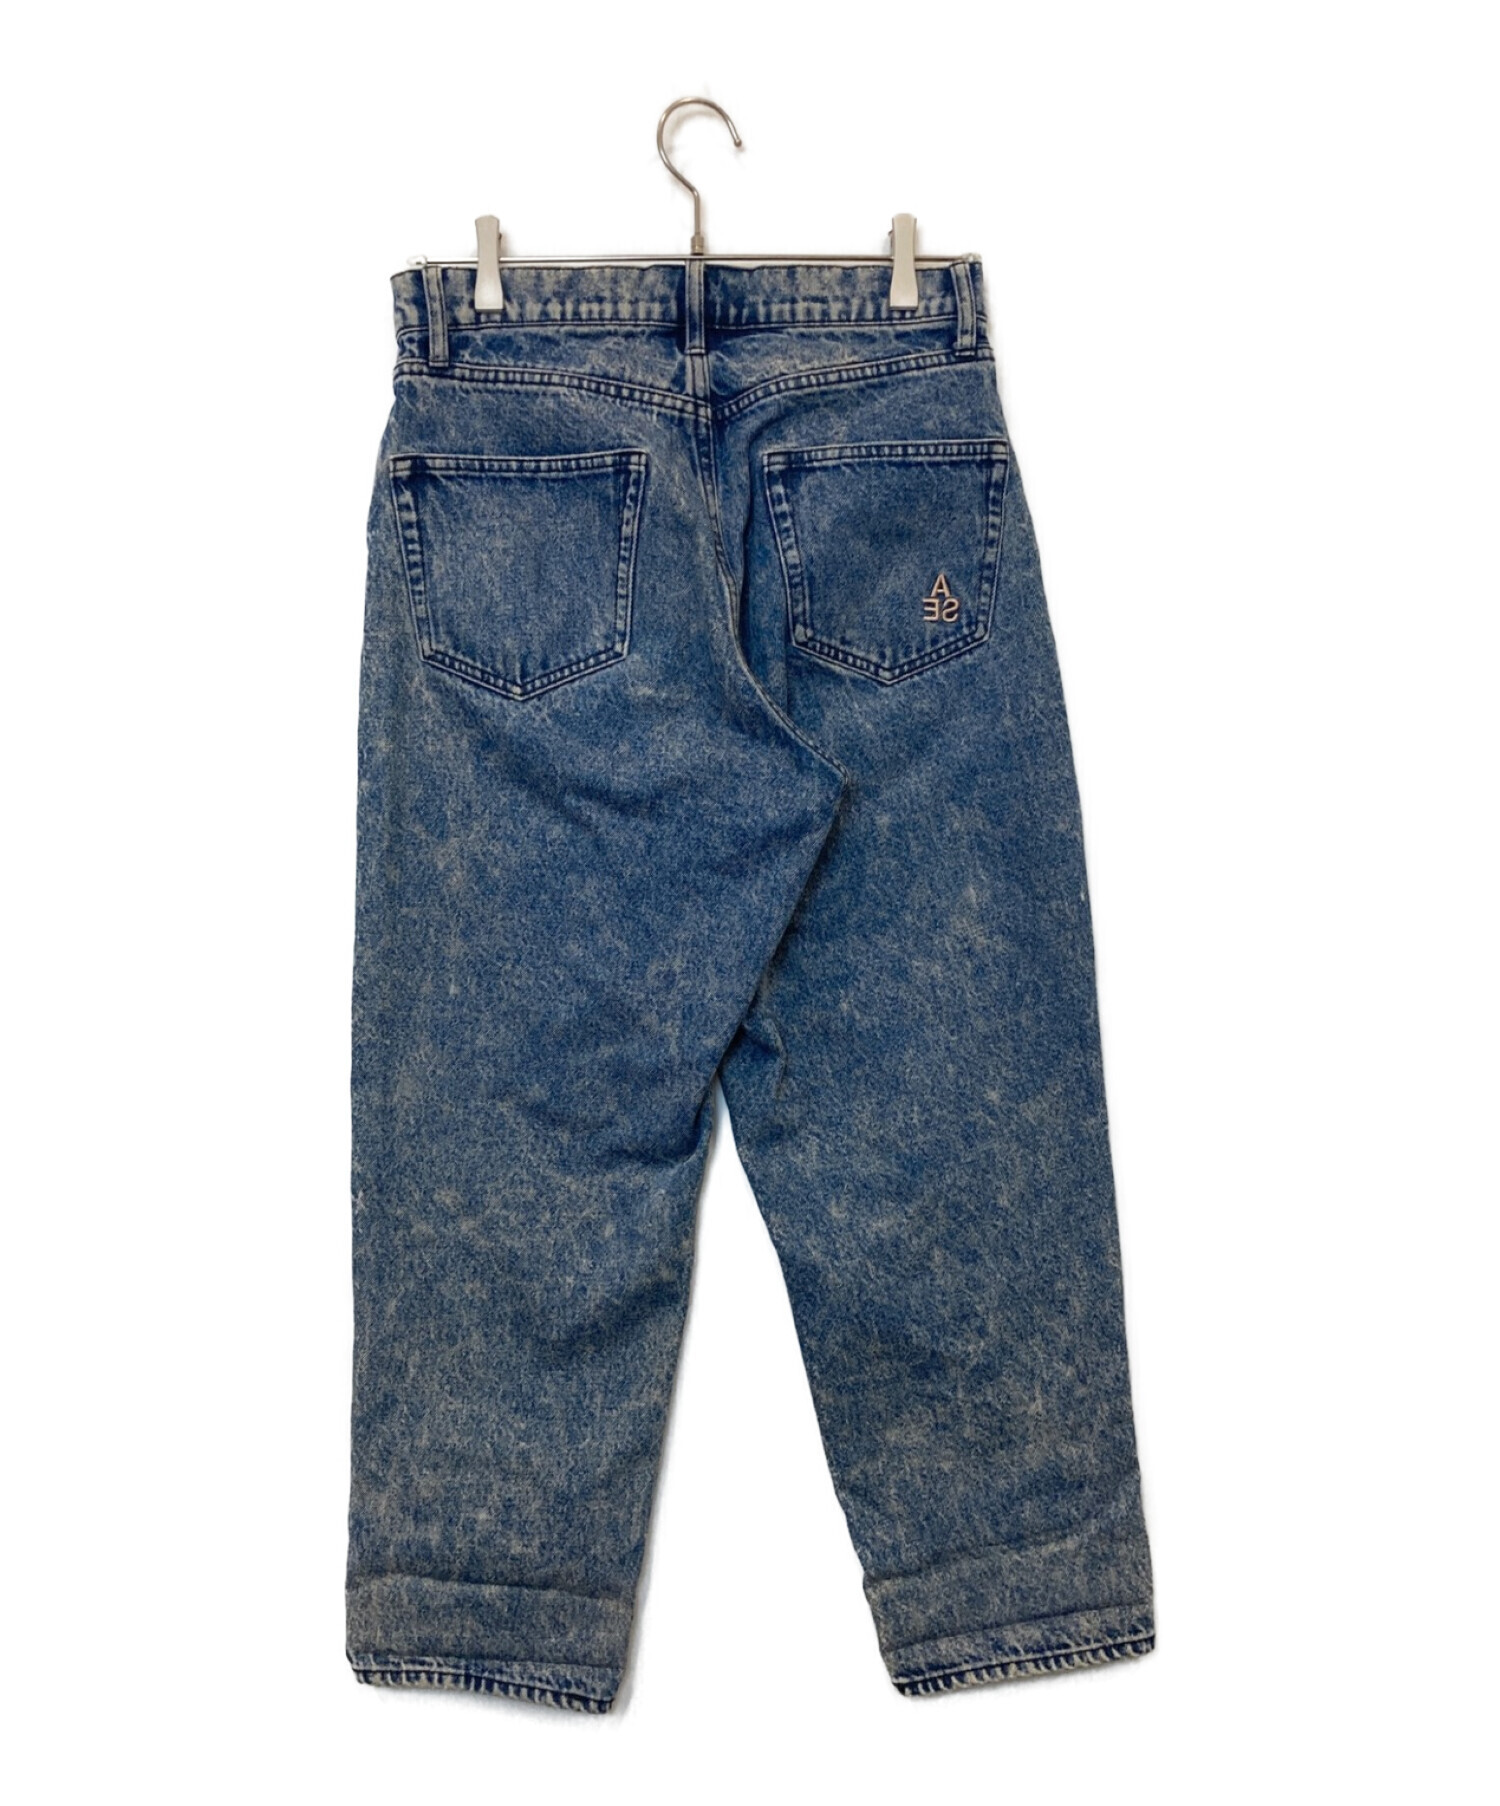 WIND AND SEA TAPERED JEANS デニム　ウィンダンシー約28cm